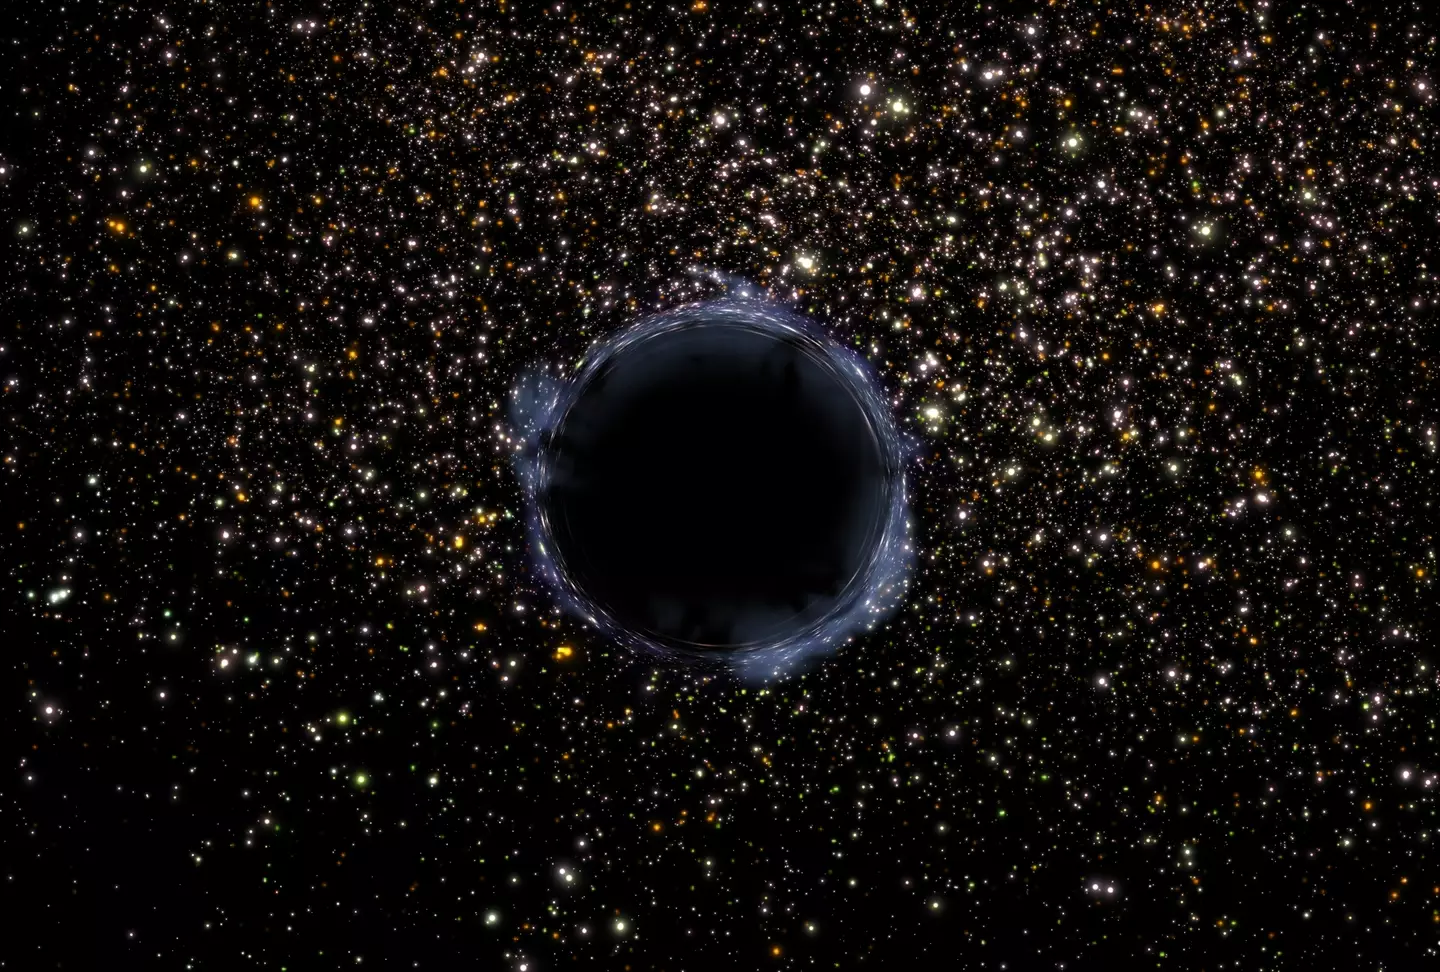 Black holes are closer to Earth than we think.